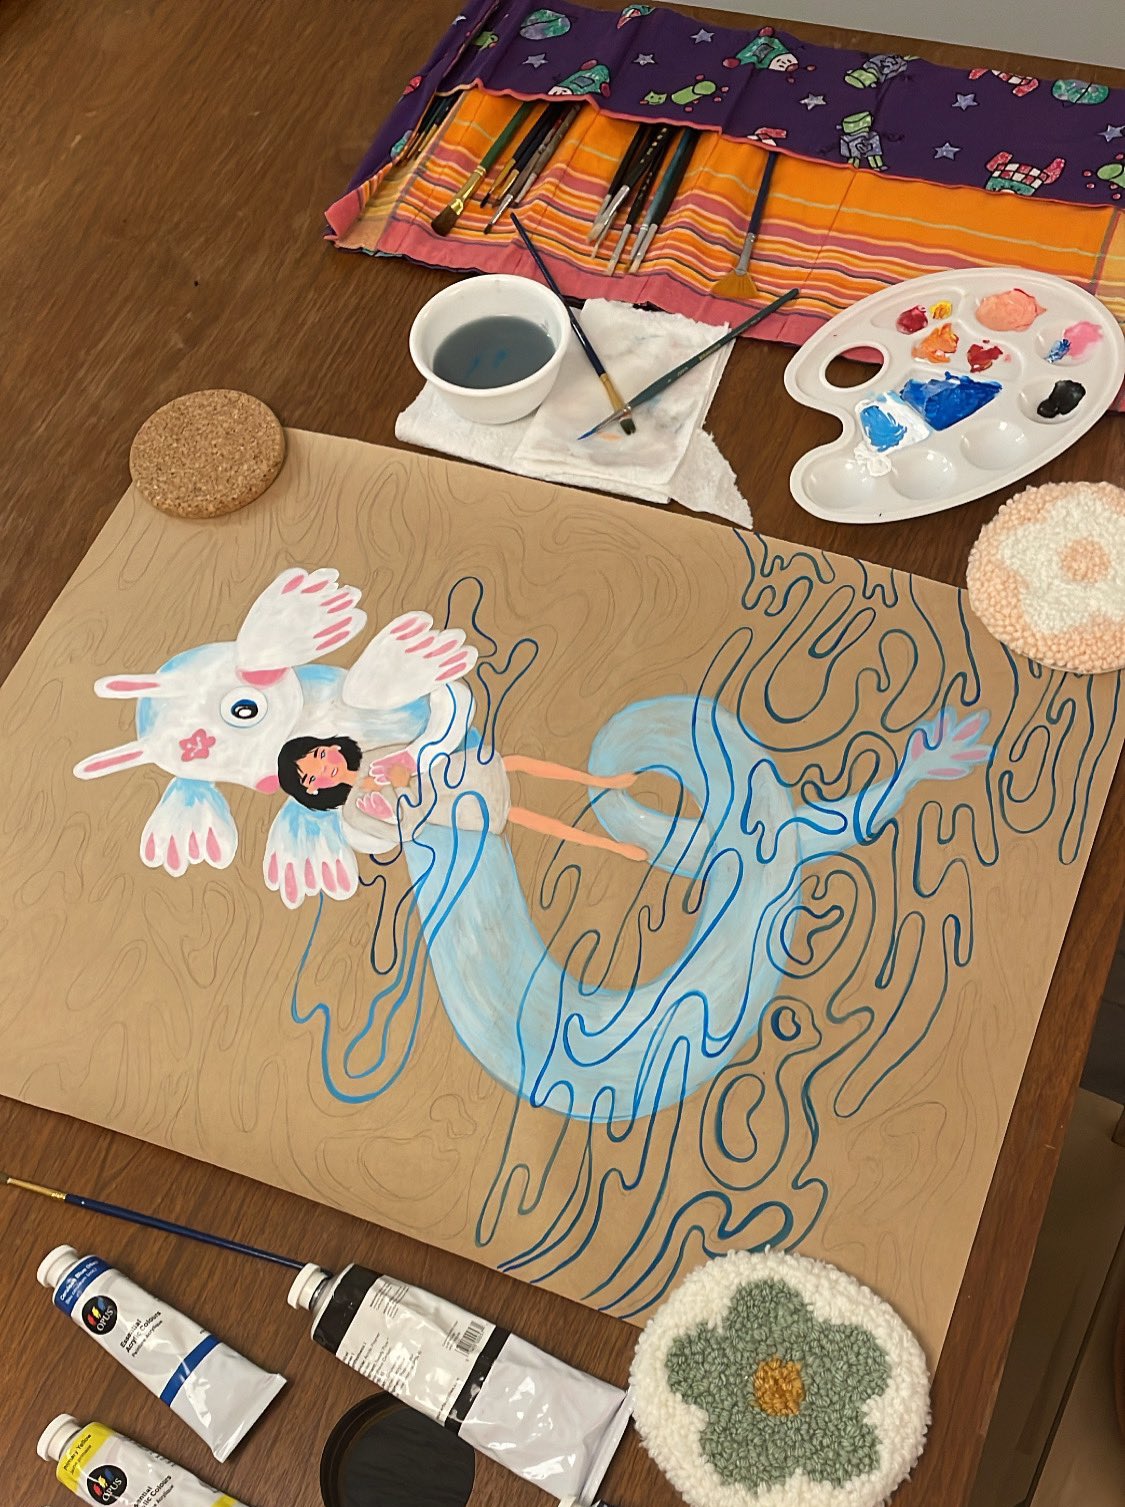 a work in progress painting showing an axylotyl holding a girl in rippling water